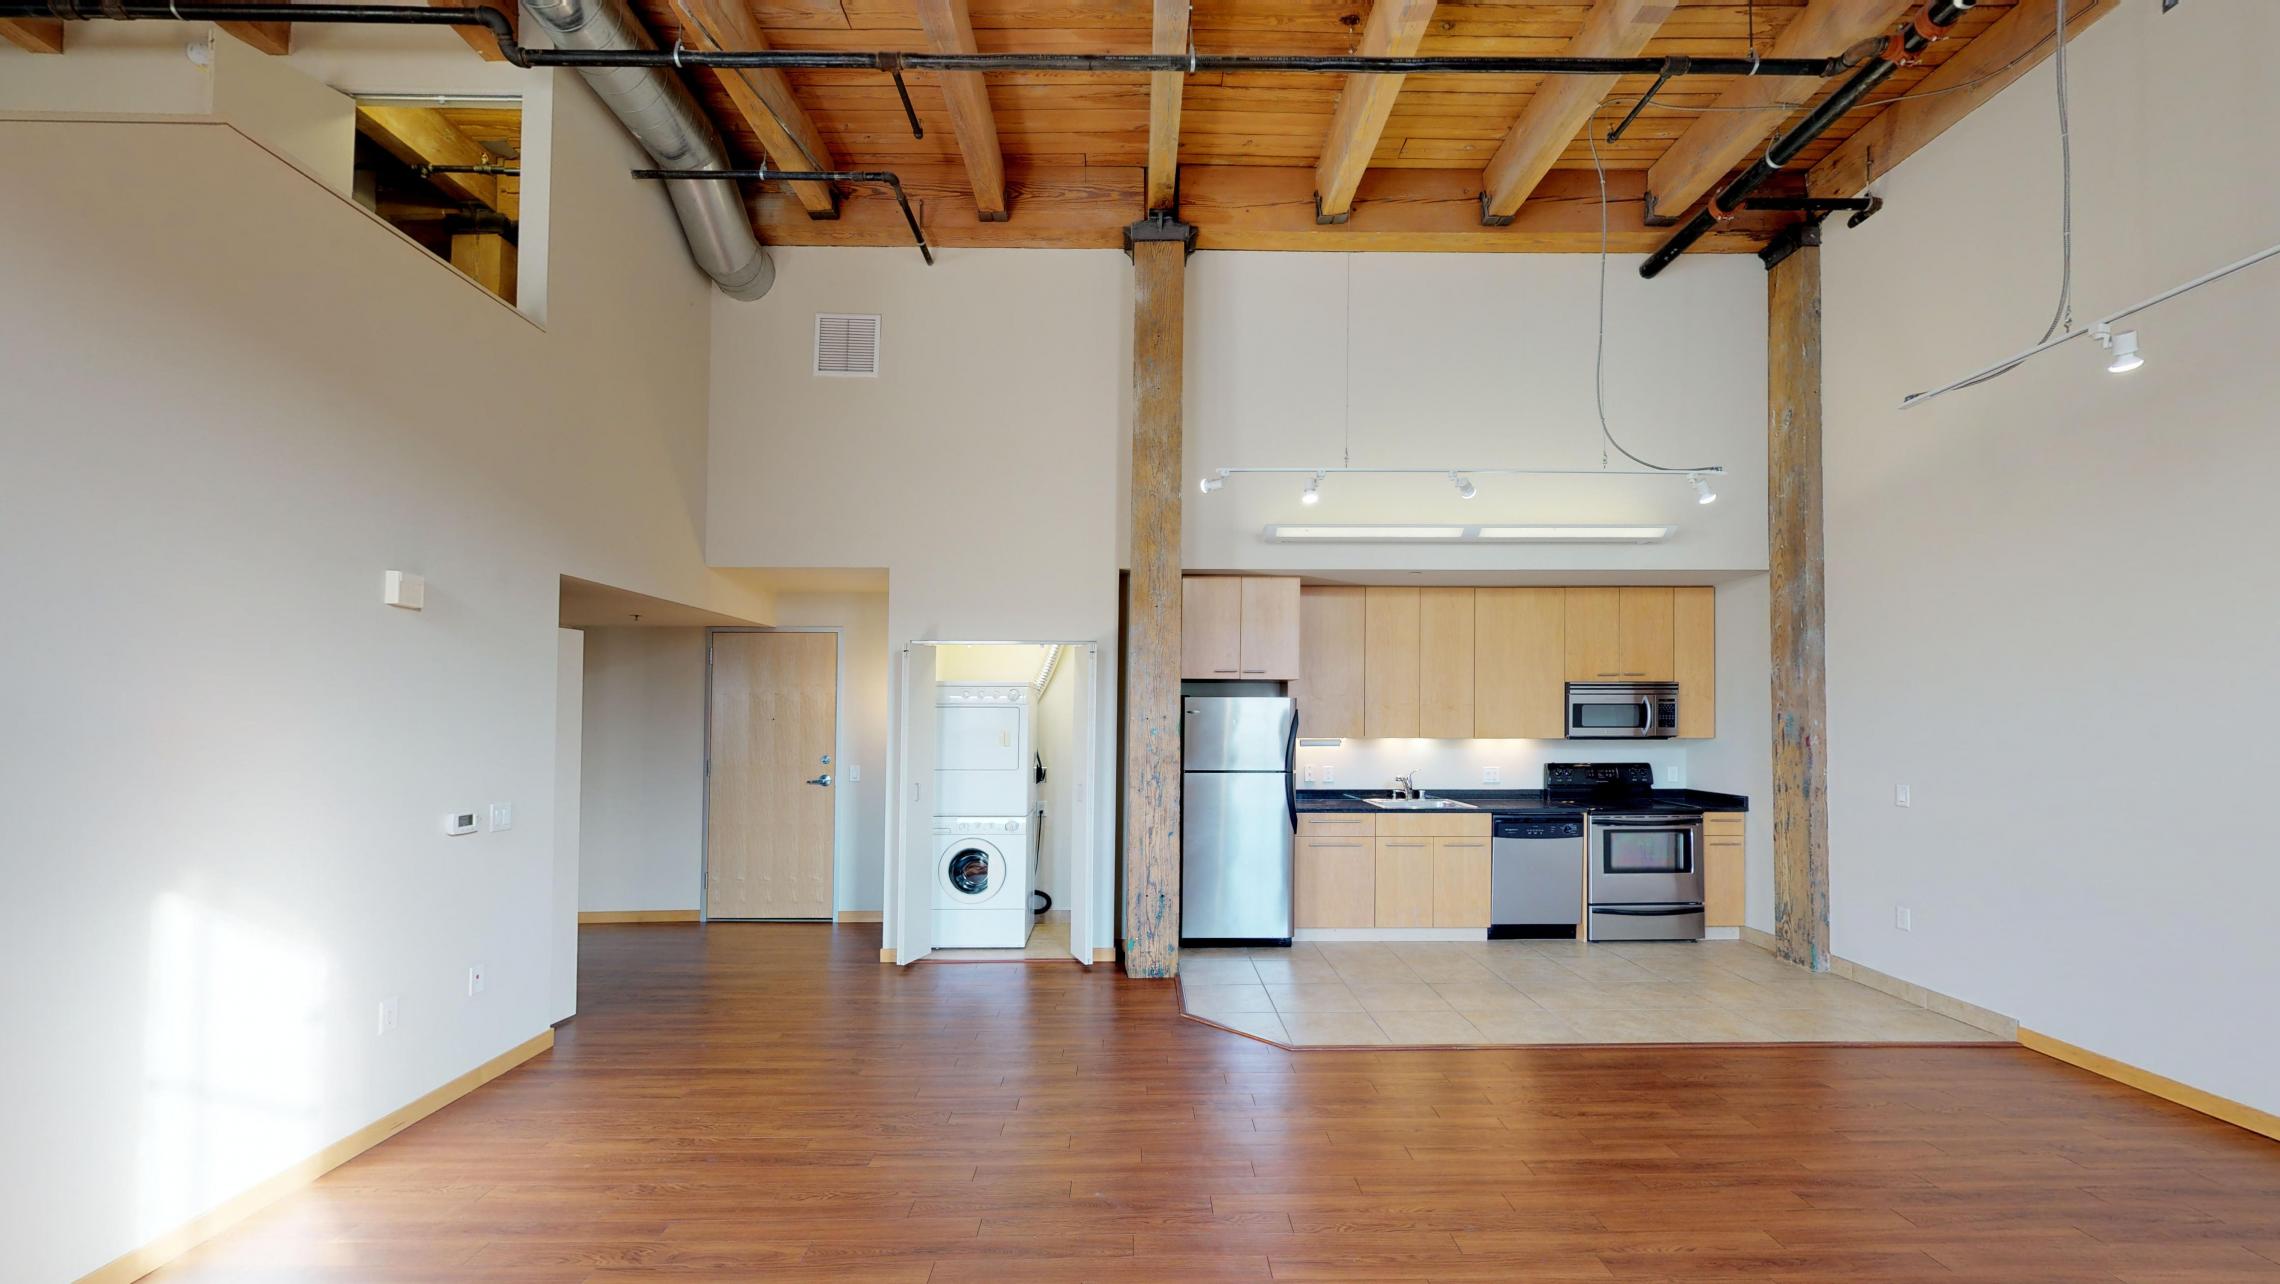 Tobacco-Lofts-Apartments-Lofted-Design-Unique-Upscale-Stunning-Sunshine-Cats-Lofted-Brick-Garage-Courtyard-Grill-Fitness-Historic-Yards-Warehouse-Apartment- E204-Lofted-Two-Bedroom